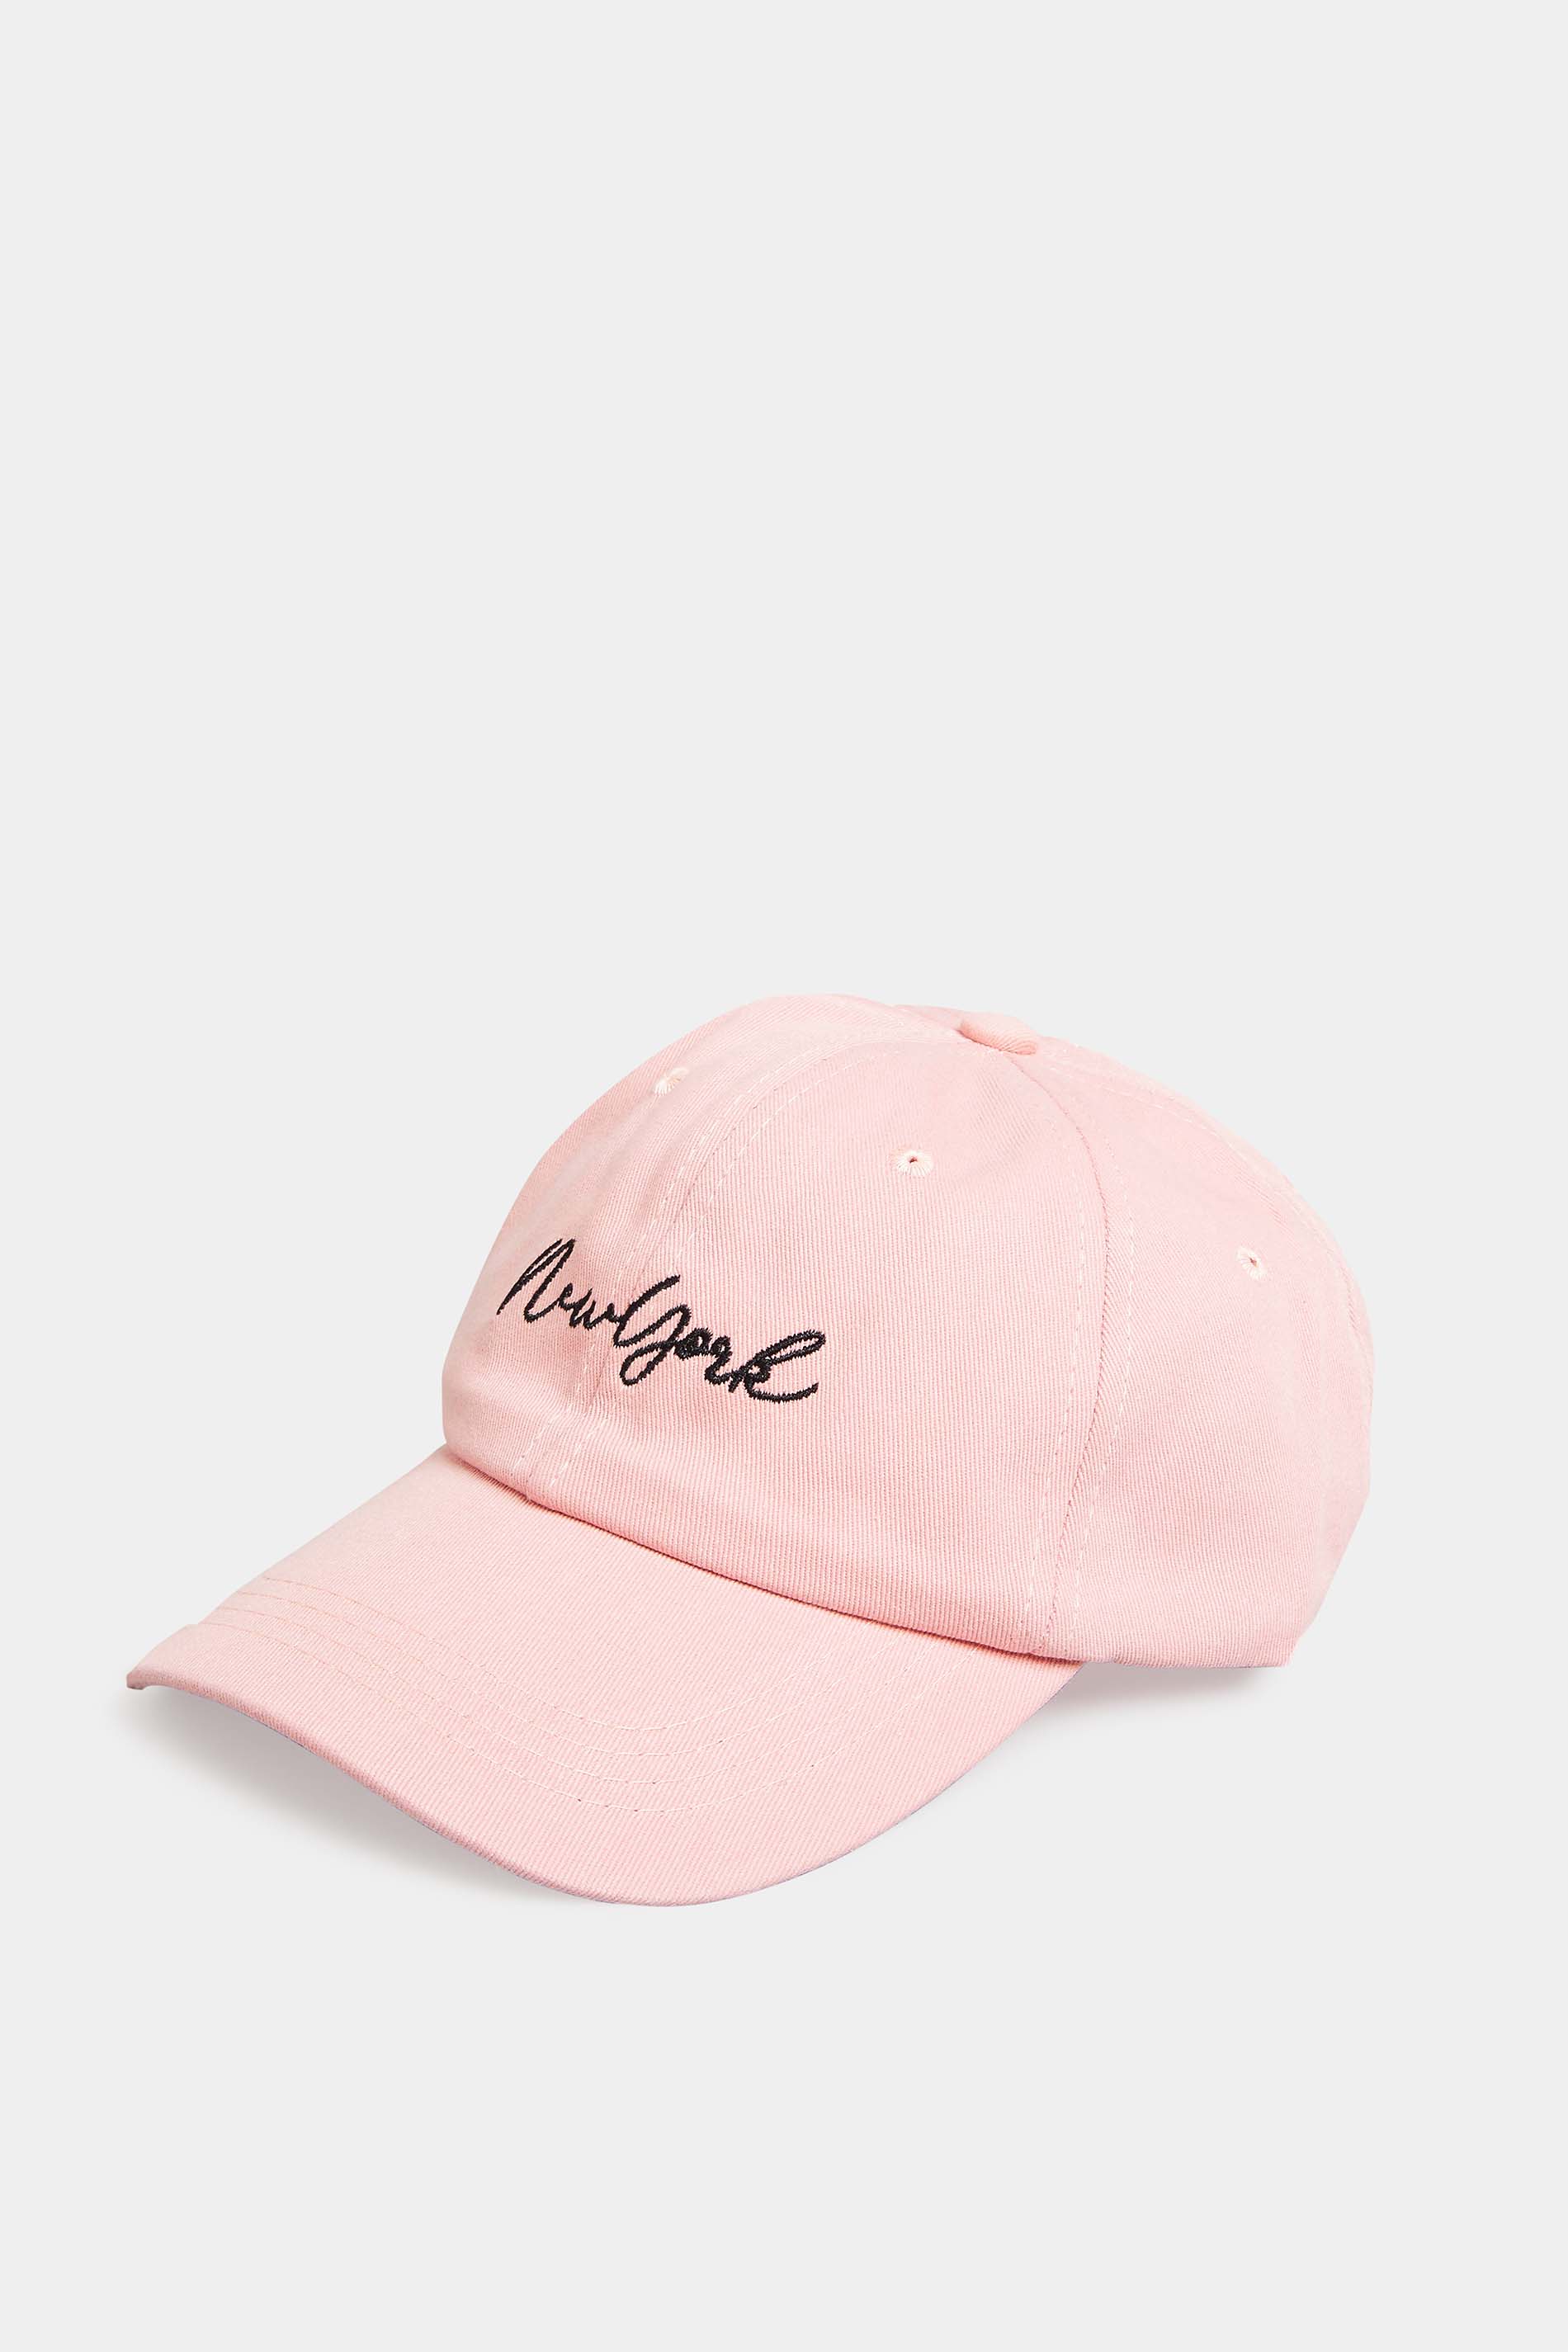 Blush Pink 'New York' Embroidered Cap_A.jpg